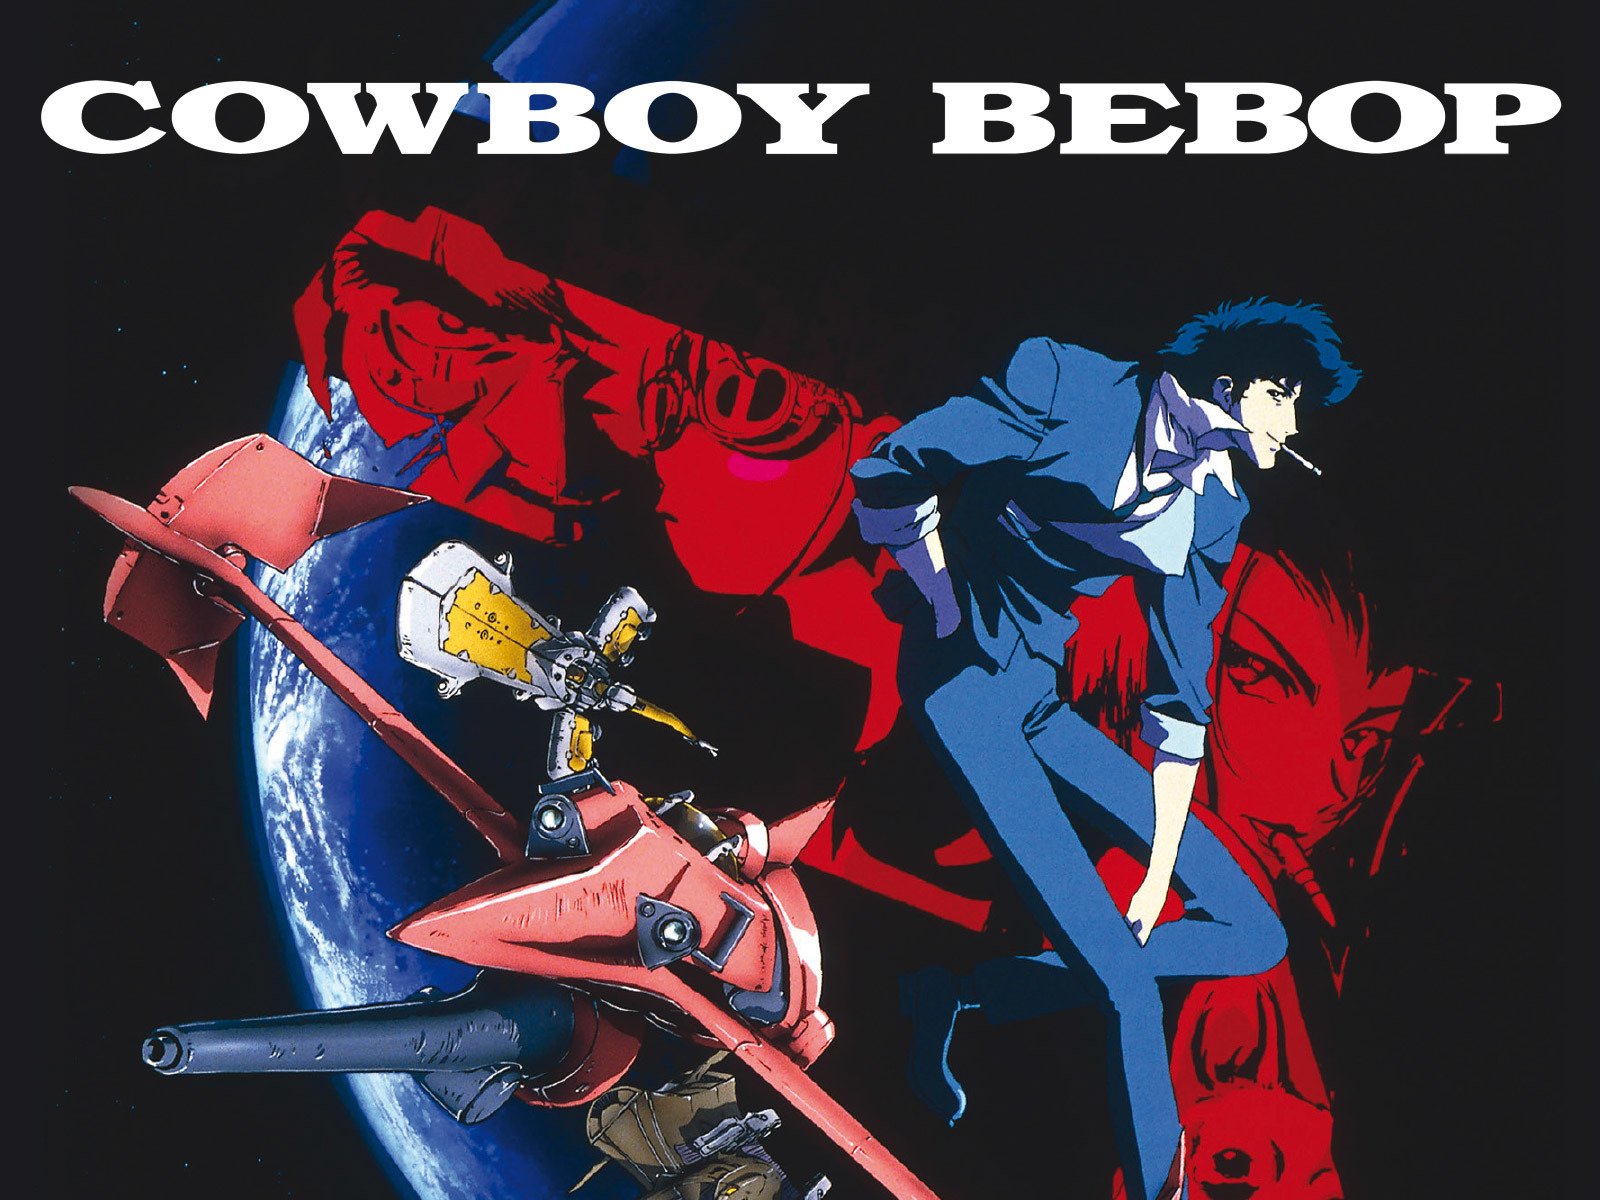 In Cowboy Bebop, bounty hunters and gangs clash in a wild future